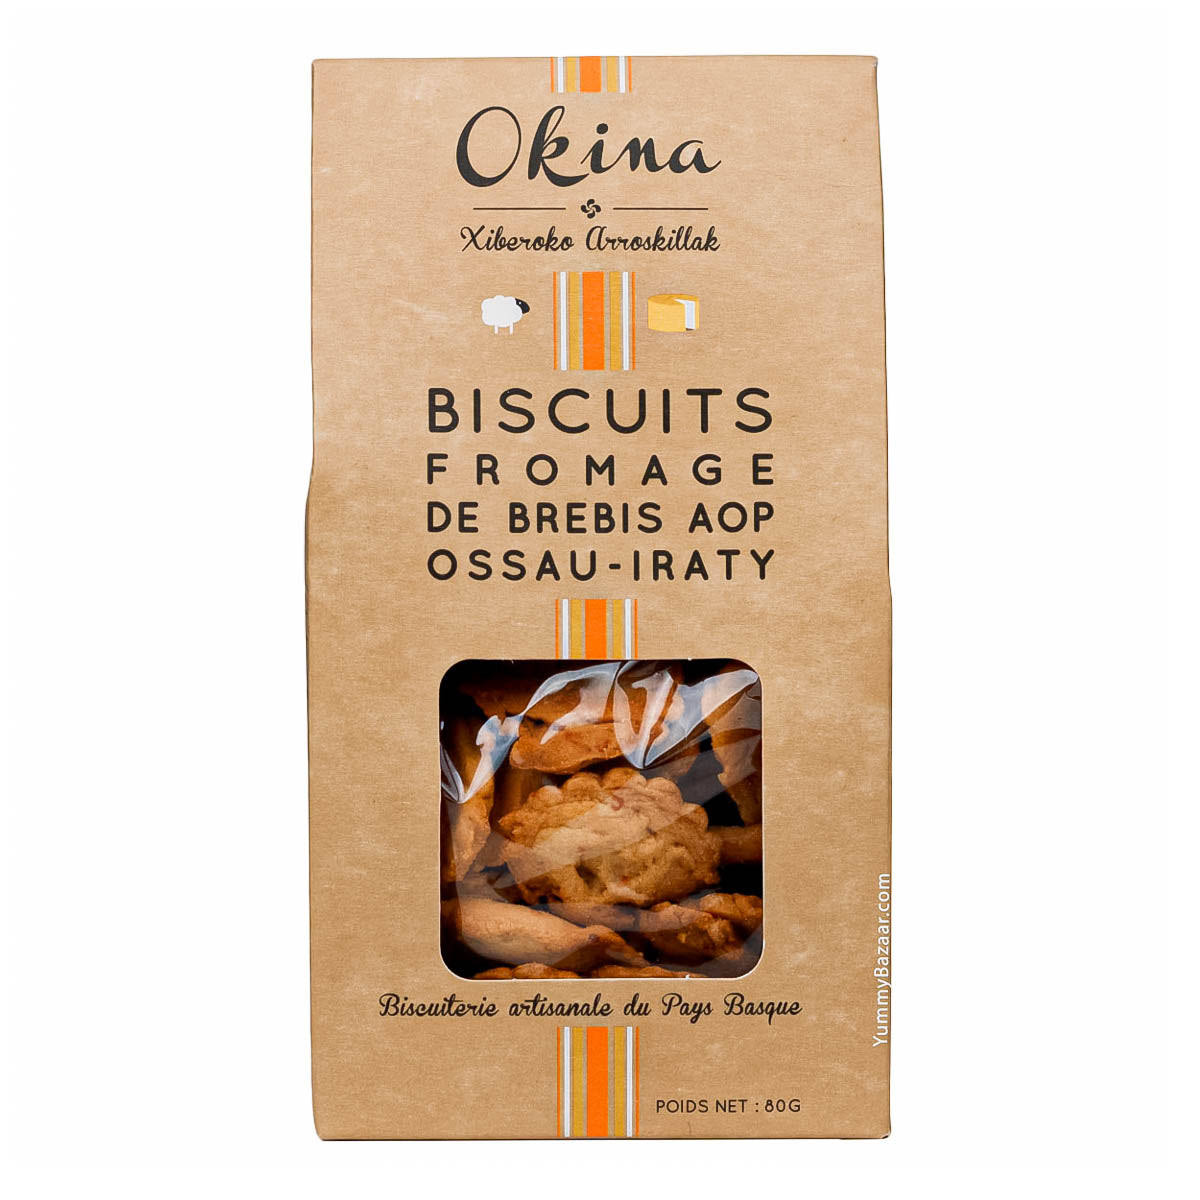 Ossau-Iraty Sheep Cheese Biscuits by Okina, Delivered by myPanier